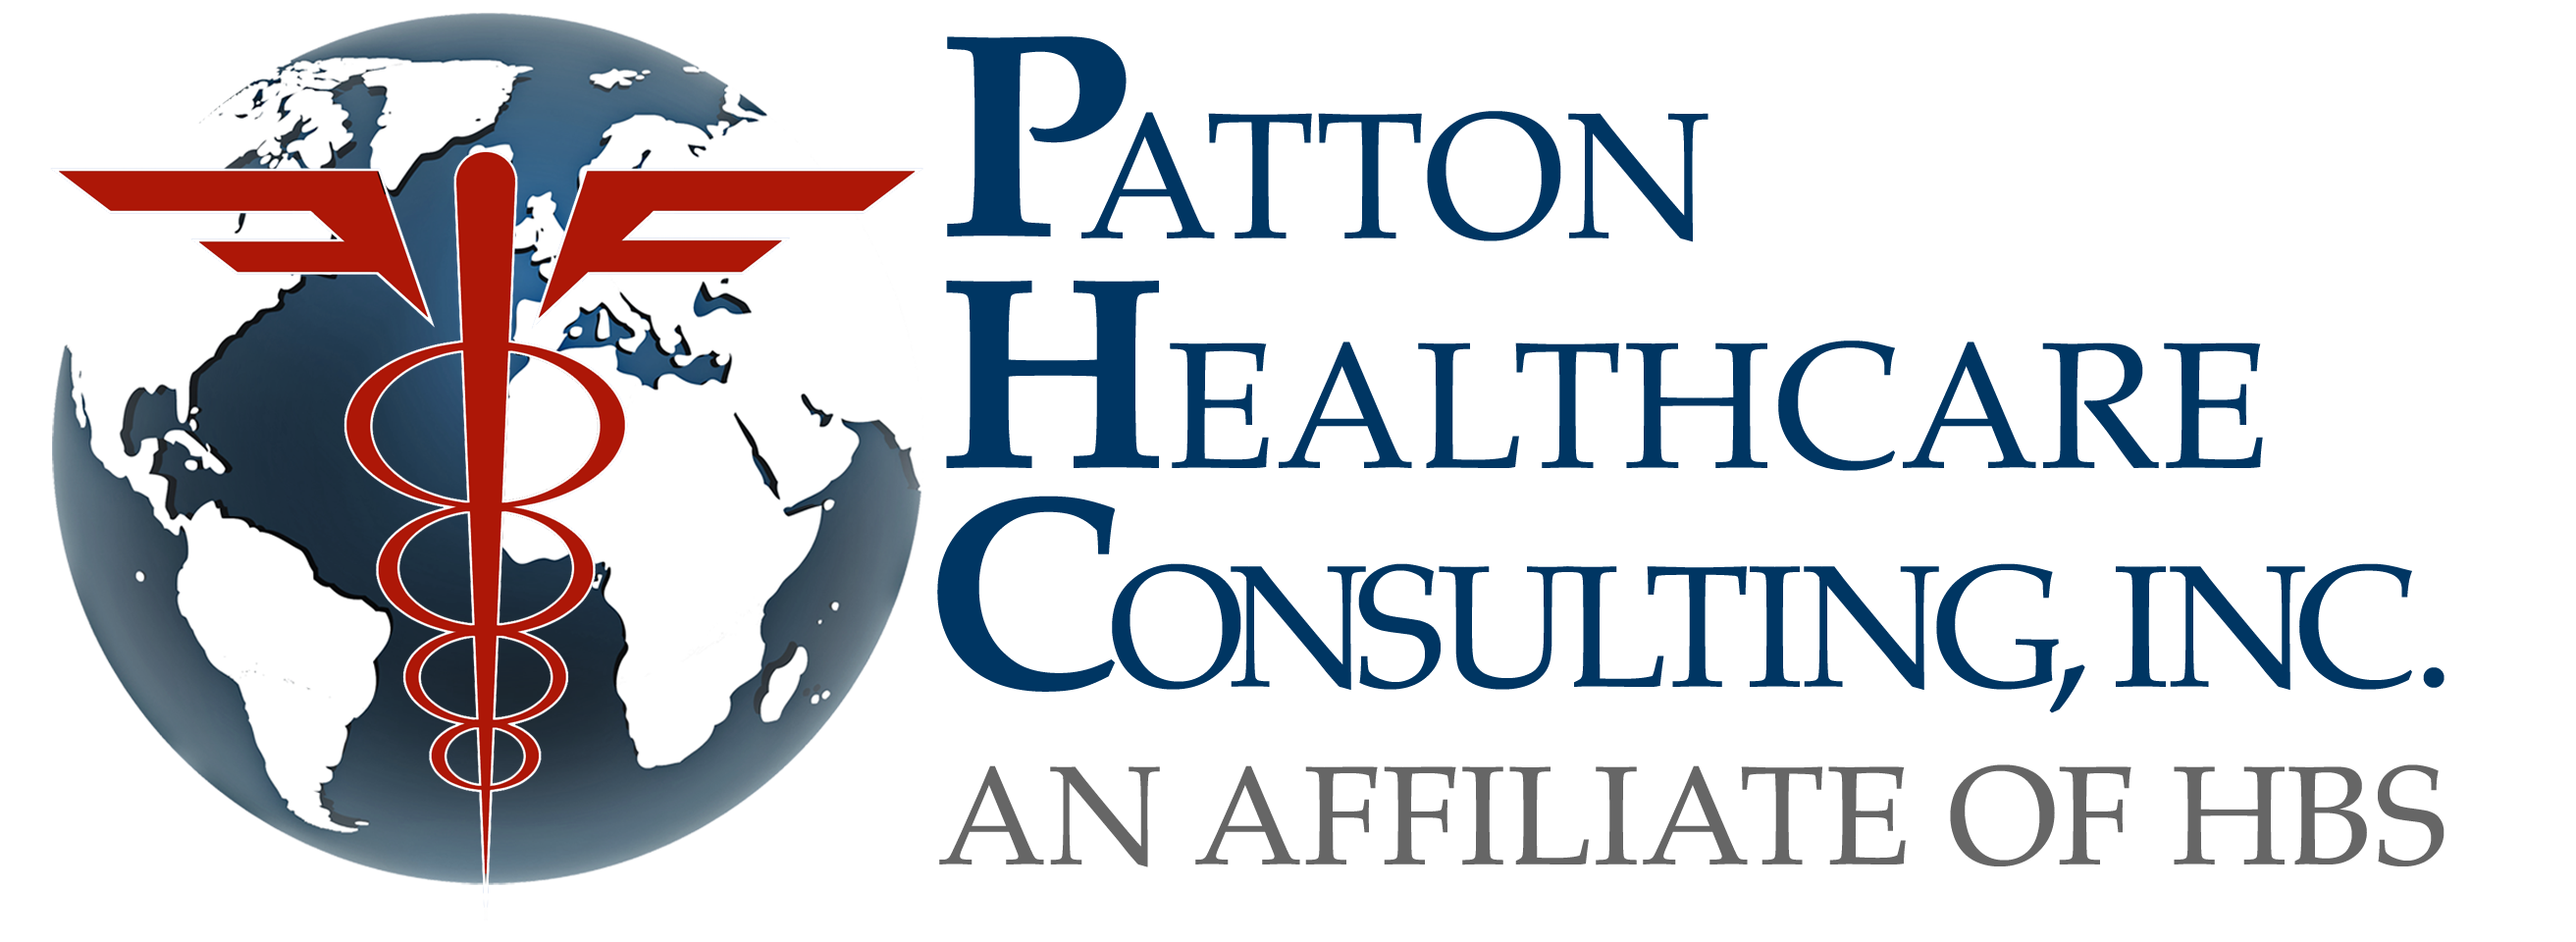 Patton Healthcare Consulting, INC an affiliate of HBS